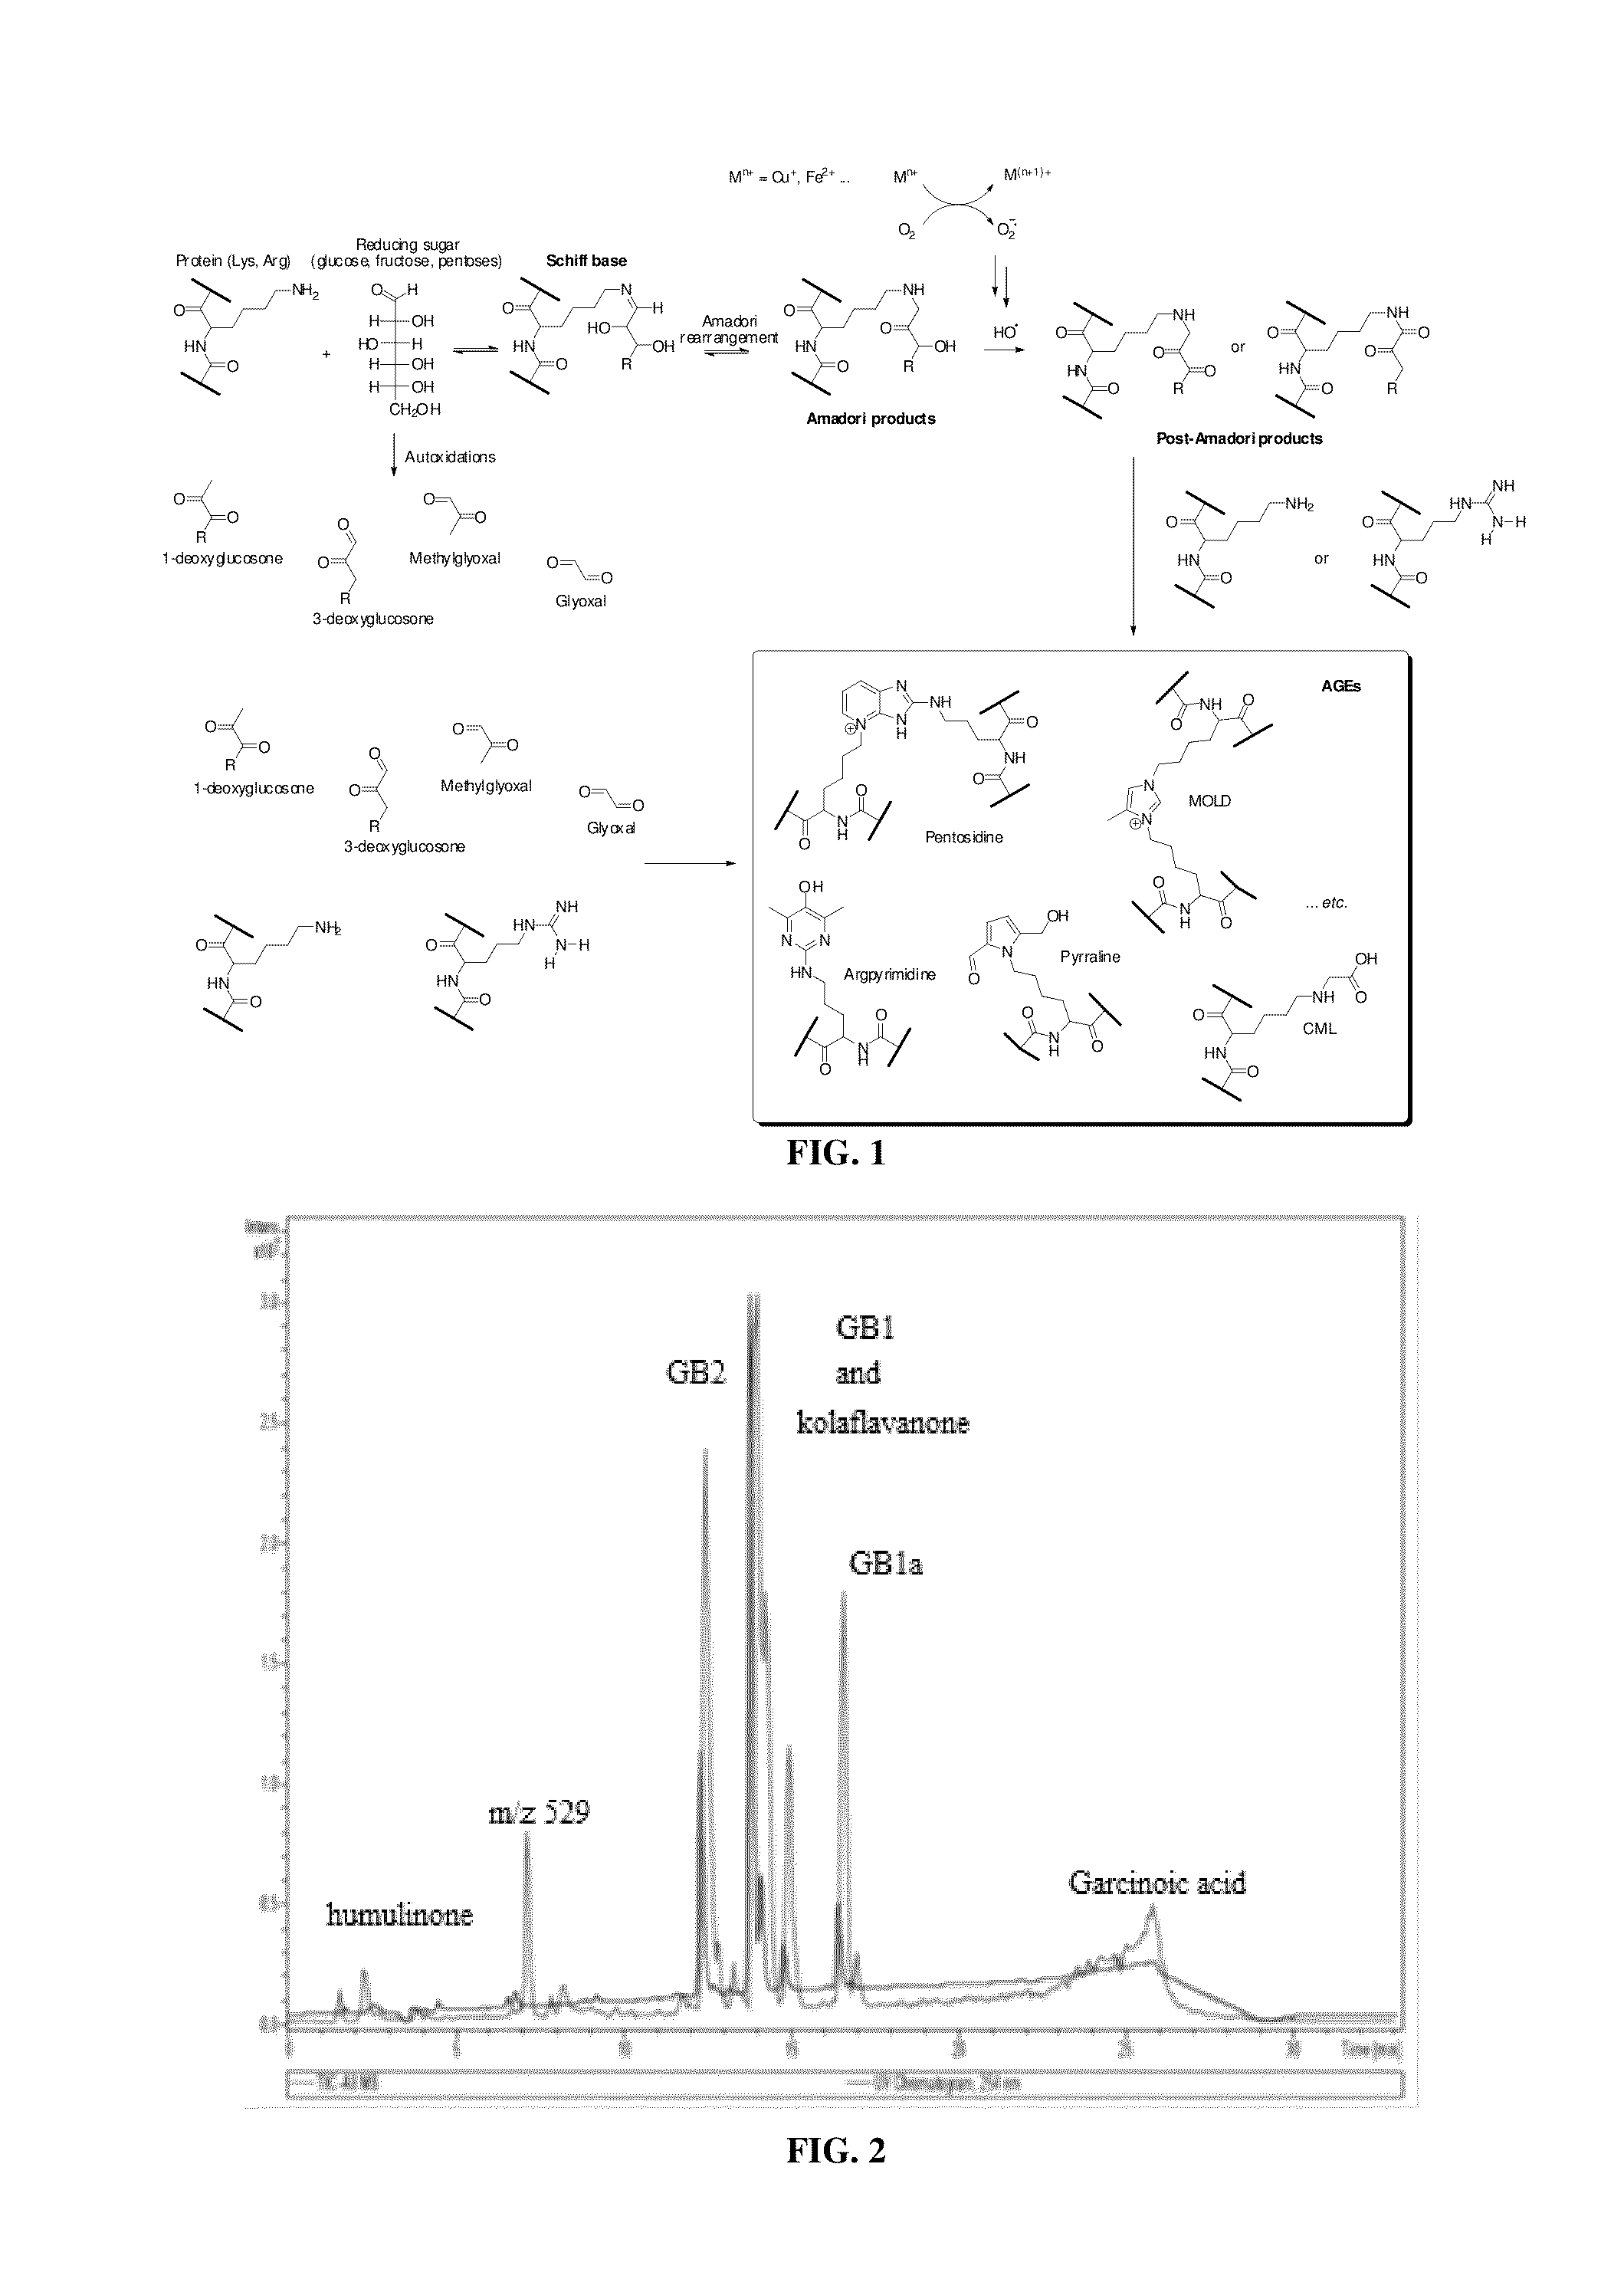 Anti-glycation agent comprising a garcinia kola extract or fraction